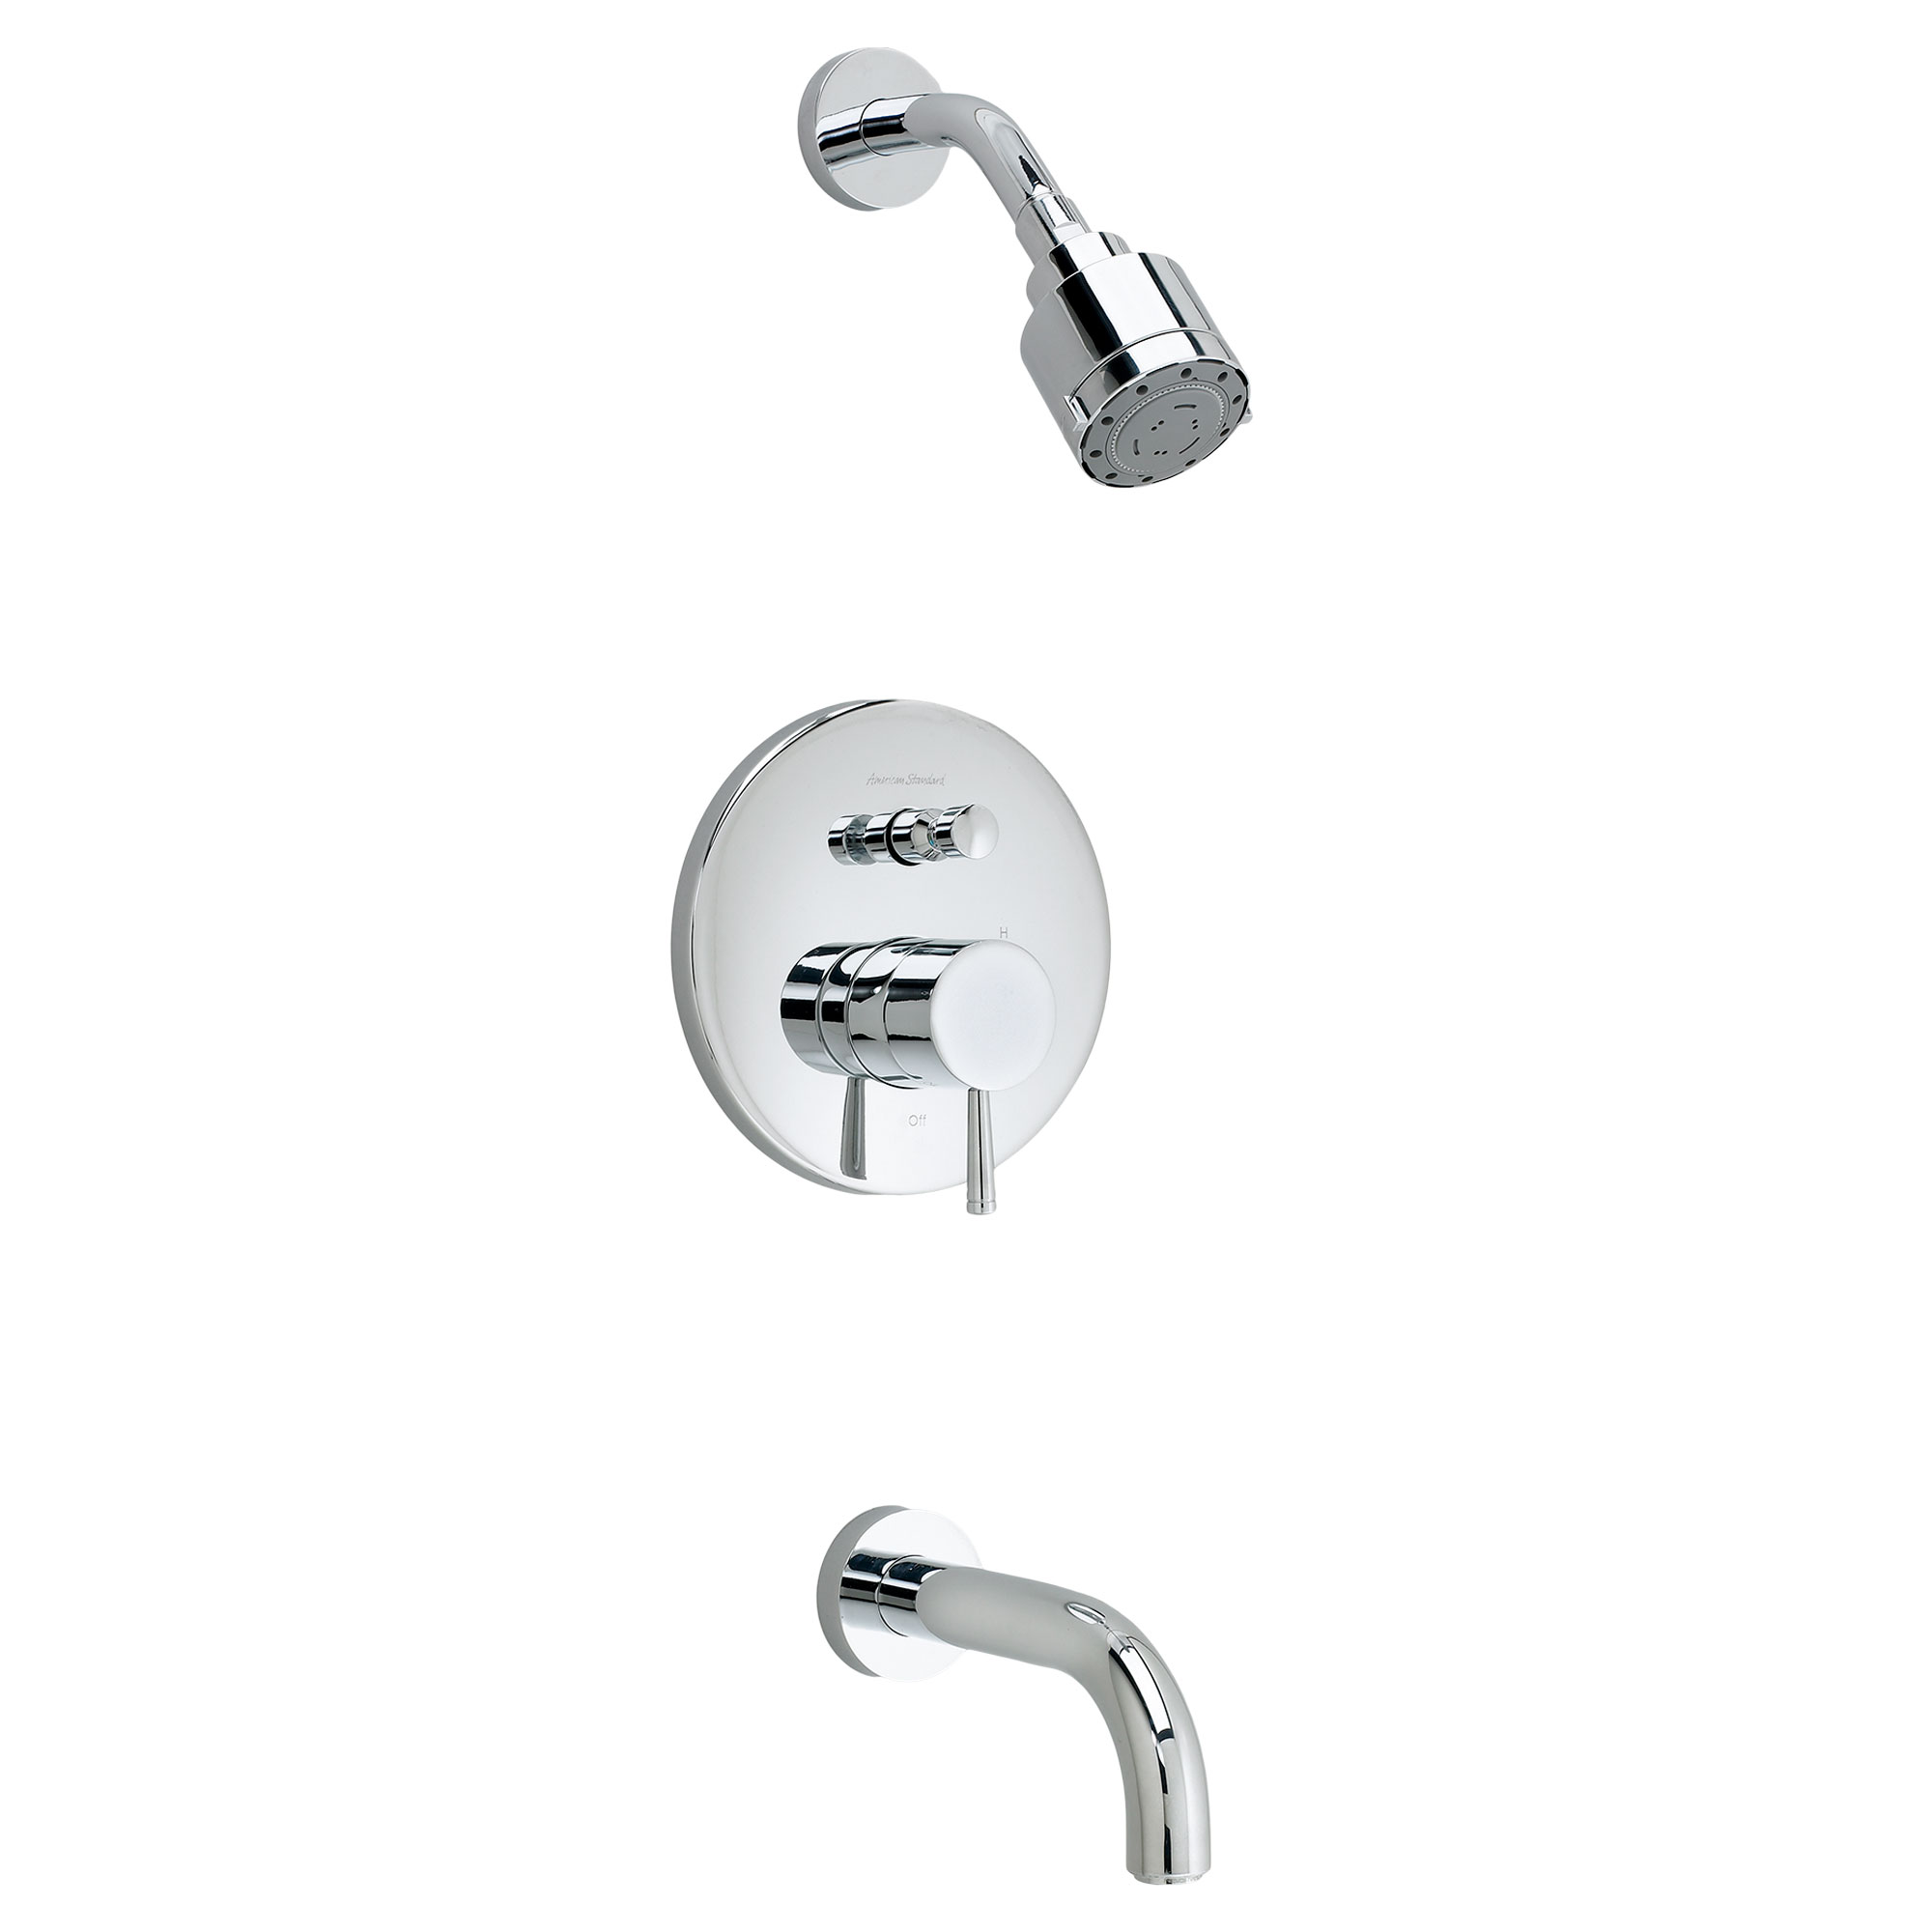 Serin™ 2.5 gpm/9.5 L/min Tub and Shower Trim Kit With Rain Shower Head, Double Ceramic Pressure Balance Cartridge With Lever Handle